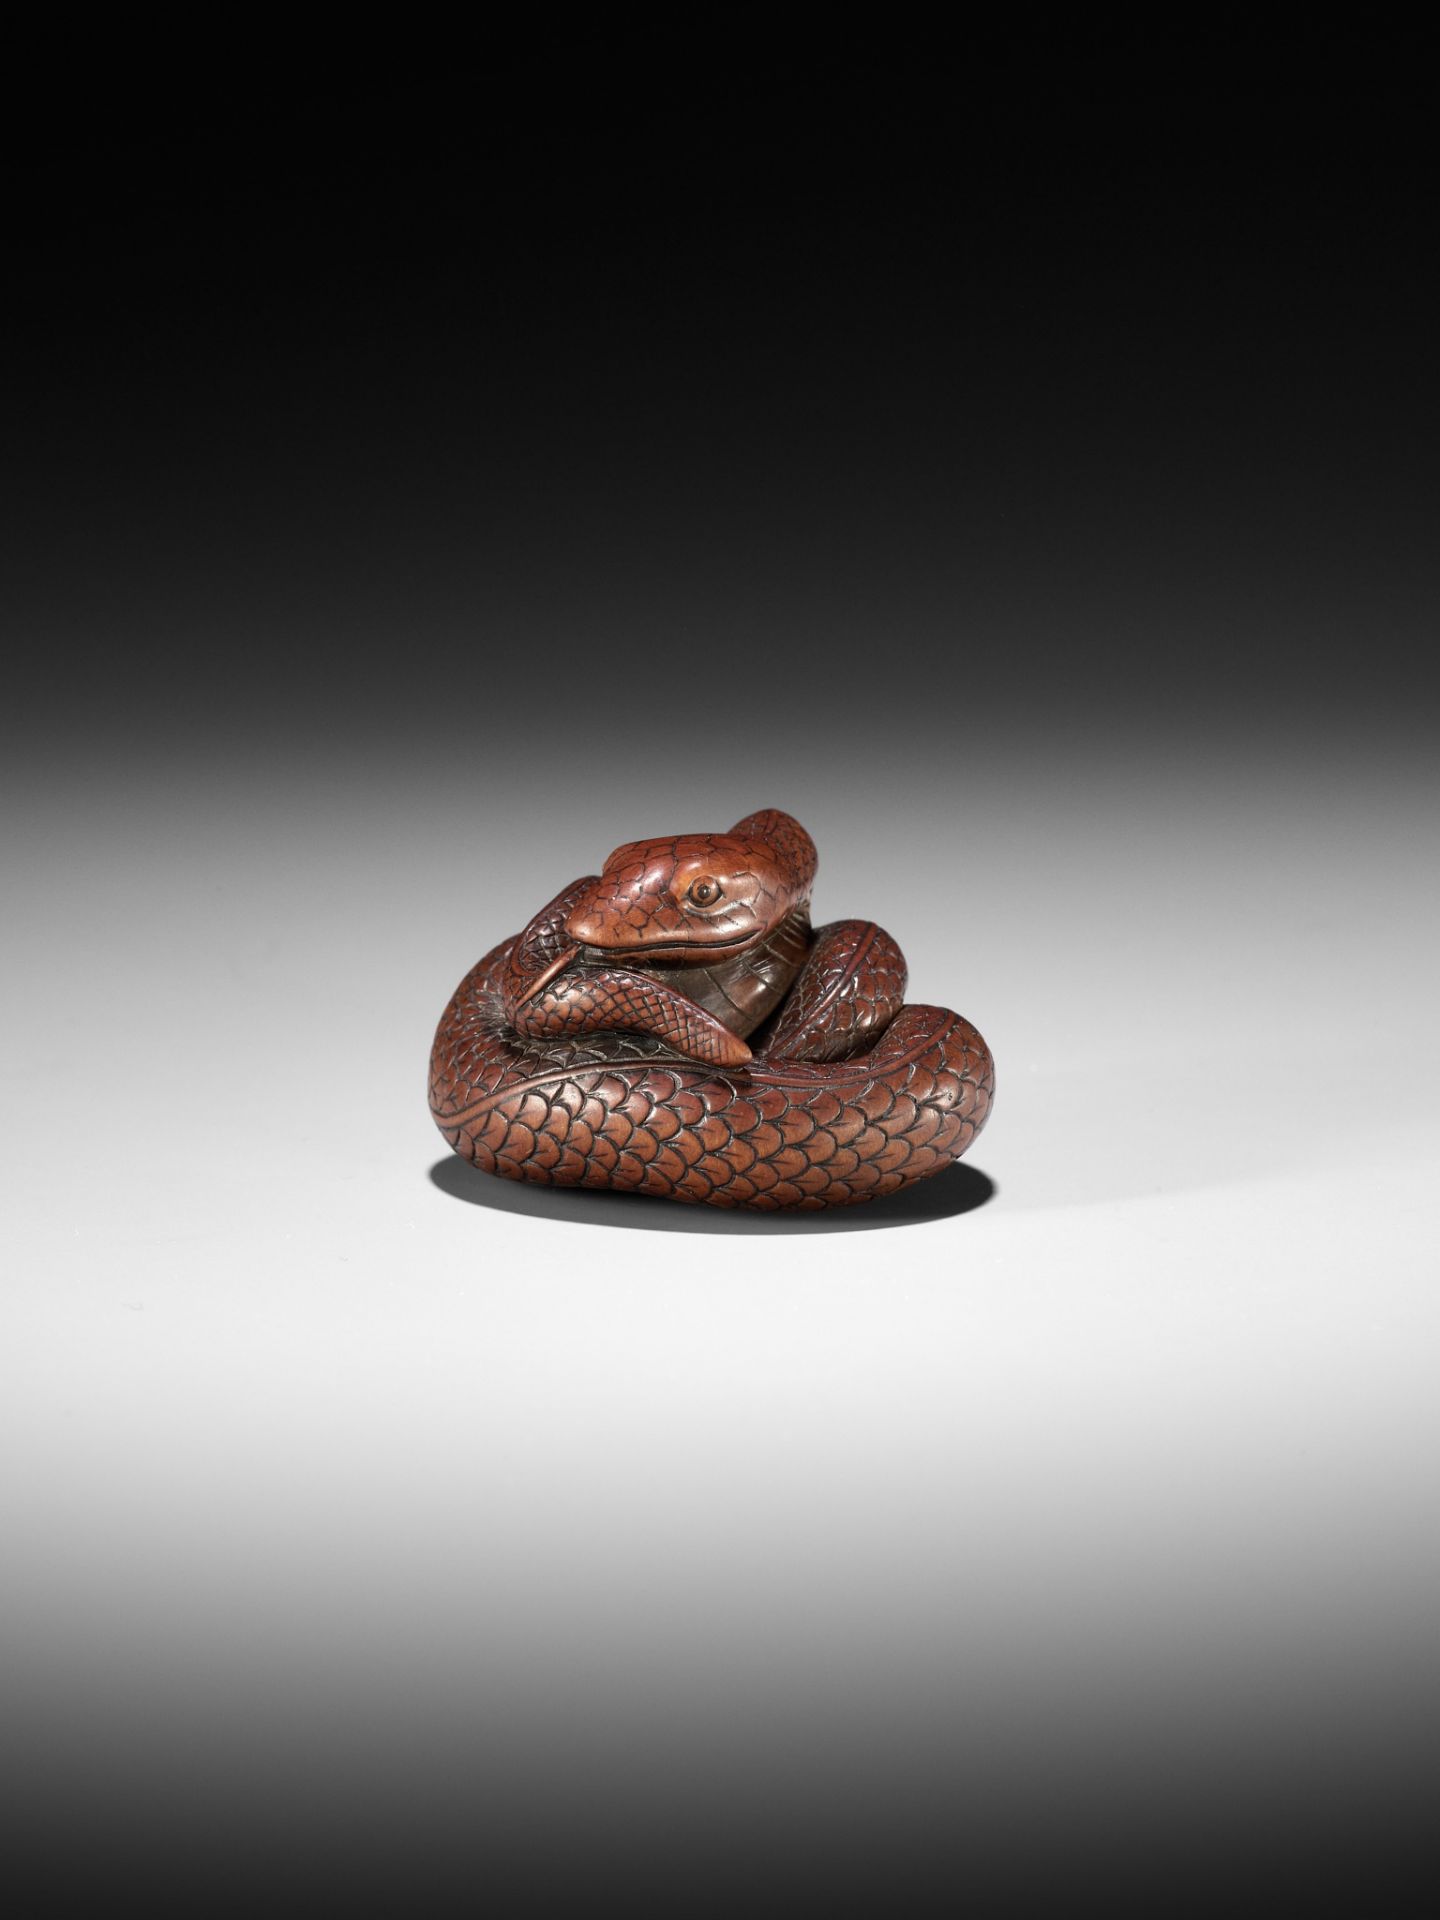 AN EXCEPTIONAL AND LARGE WOOD NETSUKE OF A SNAKE, ATTRIBUTED TO OKATOMO - Image 2 of 19